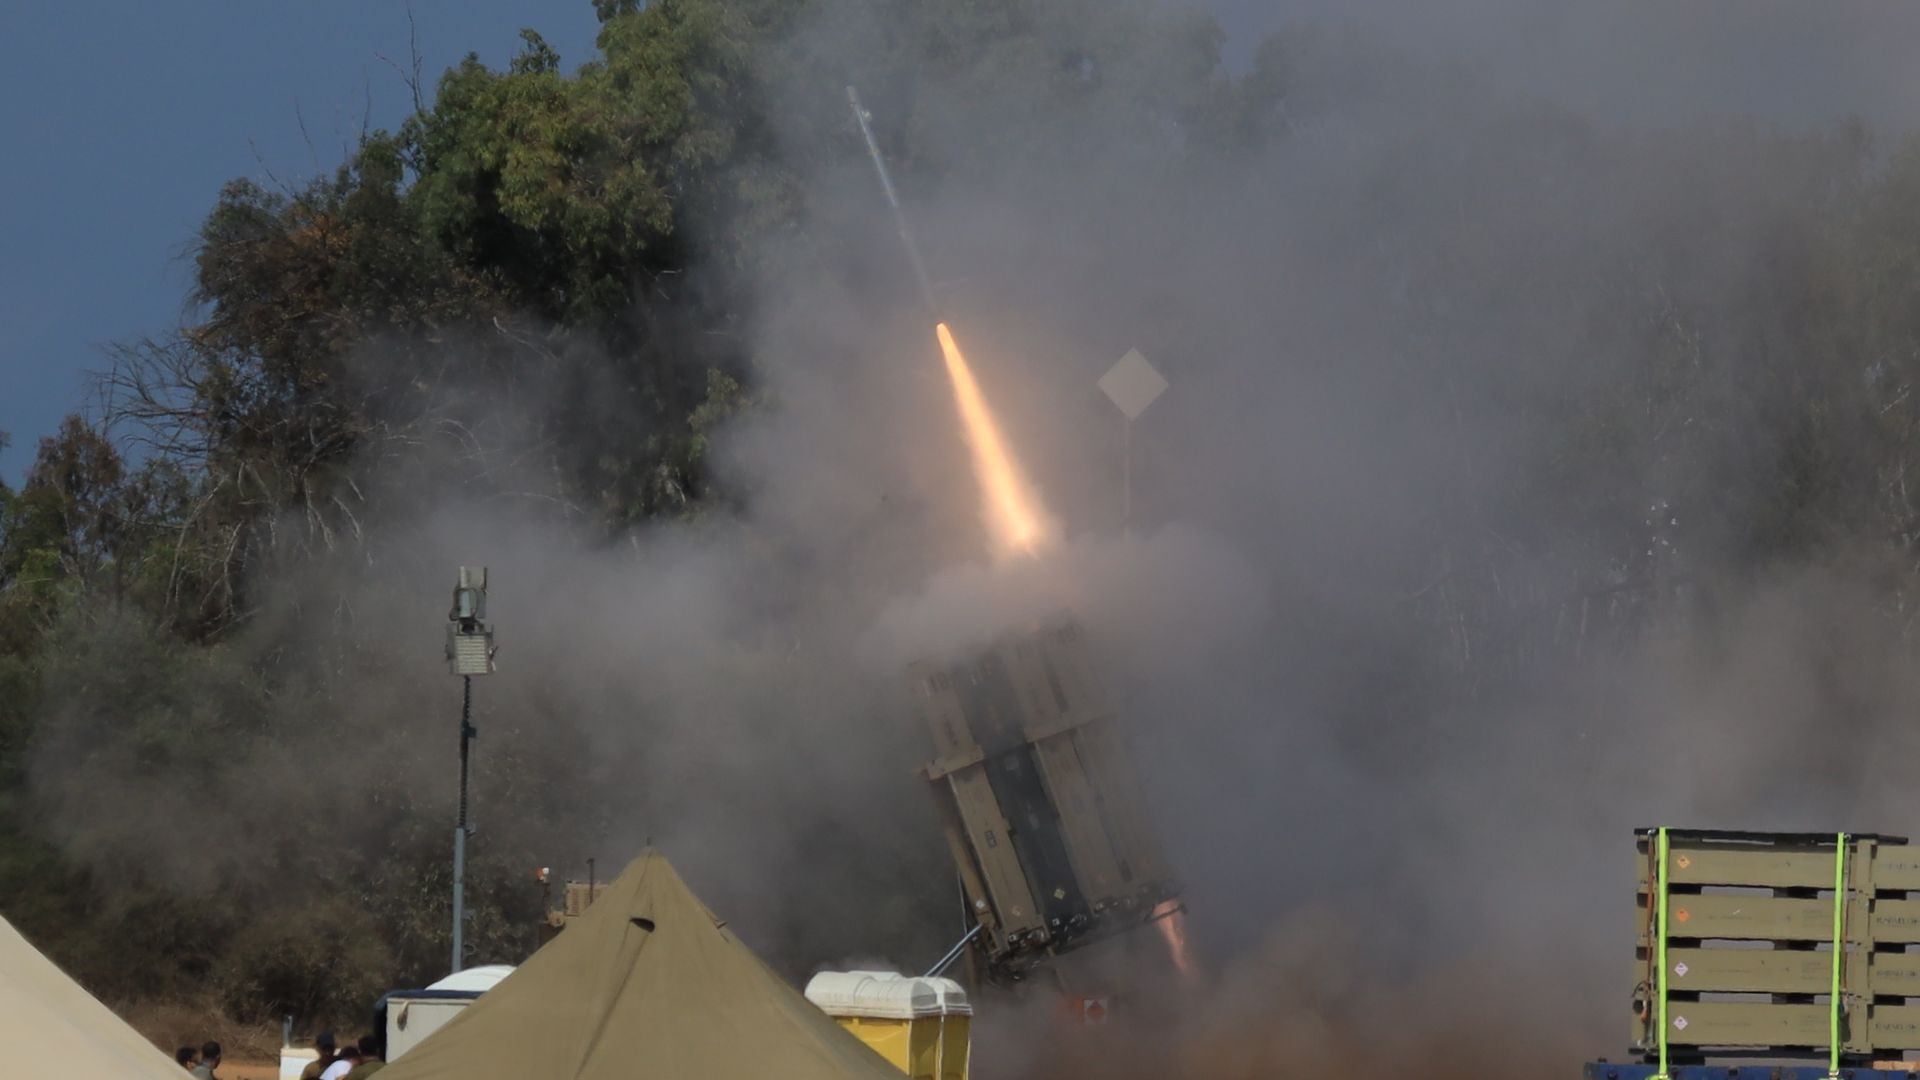 Bipartisan lawmakers introduced a bill to give Israel  billion for its Iron Dome. Congress' leadership is prioritizing bills for Israel.